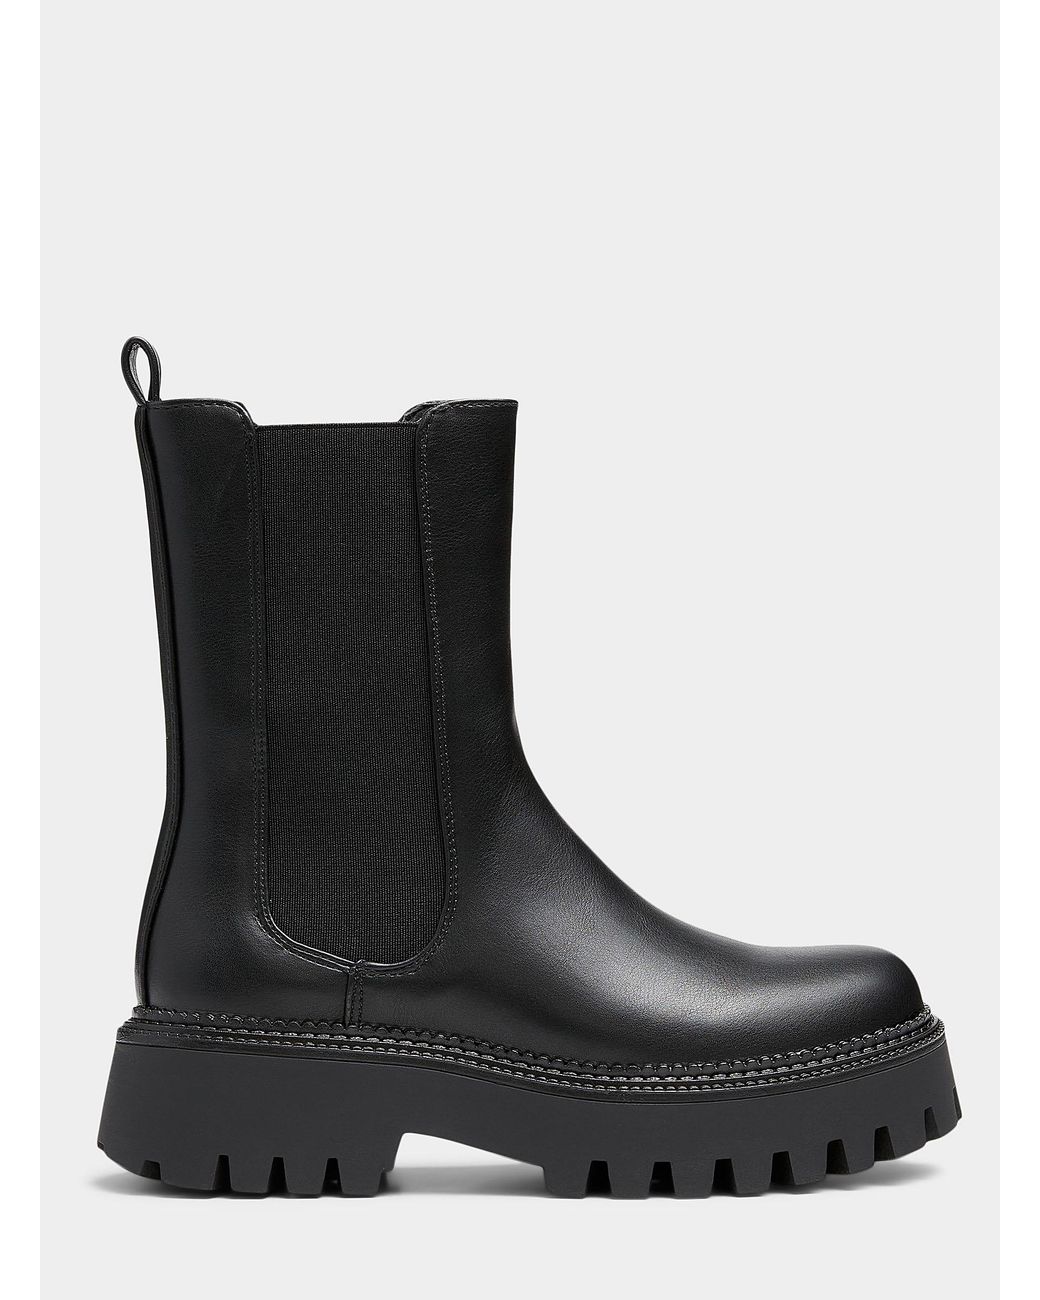 Steve Madden Briona Chelsea High Boots in Black | Lyst